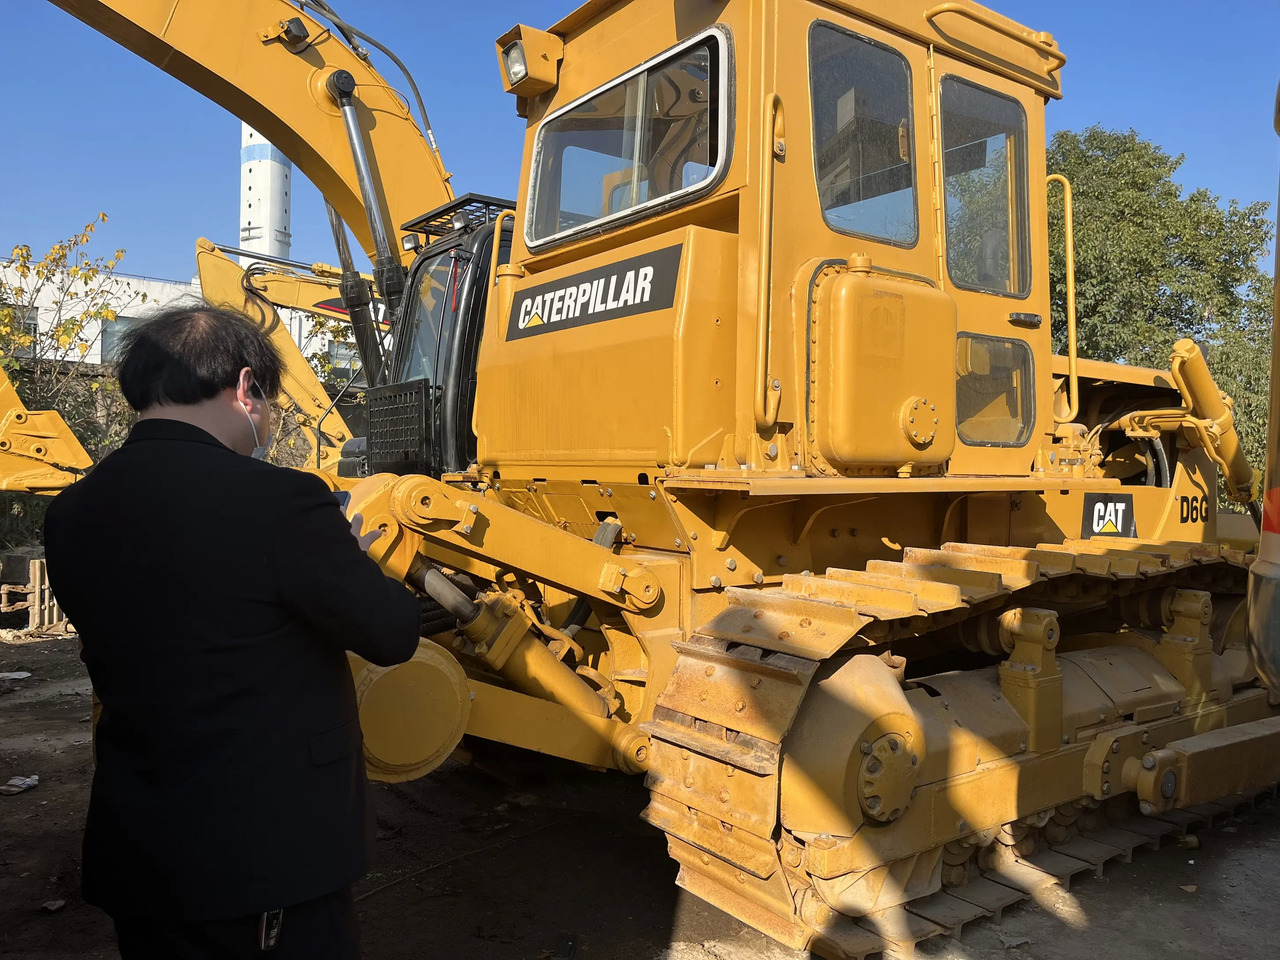 Caterpillar used bulldozer D6G D6R D7G D7R CAT bulldozer secondhand machine cheap price for sale - Bulldozer: picture 4